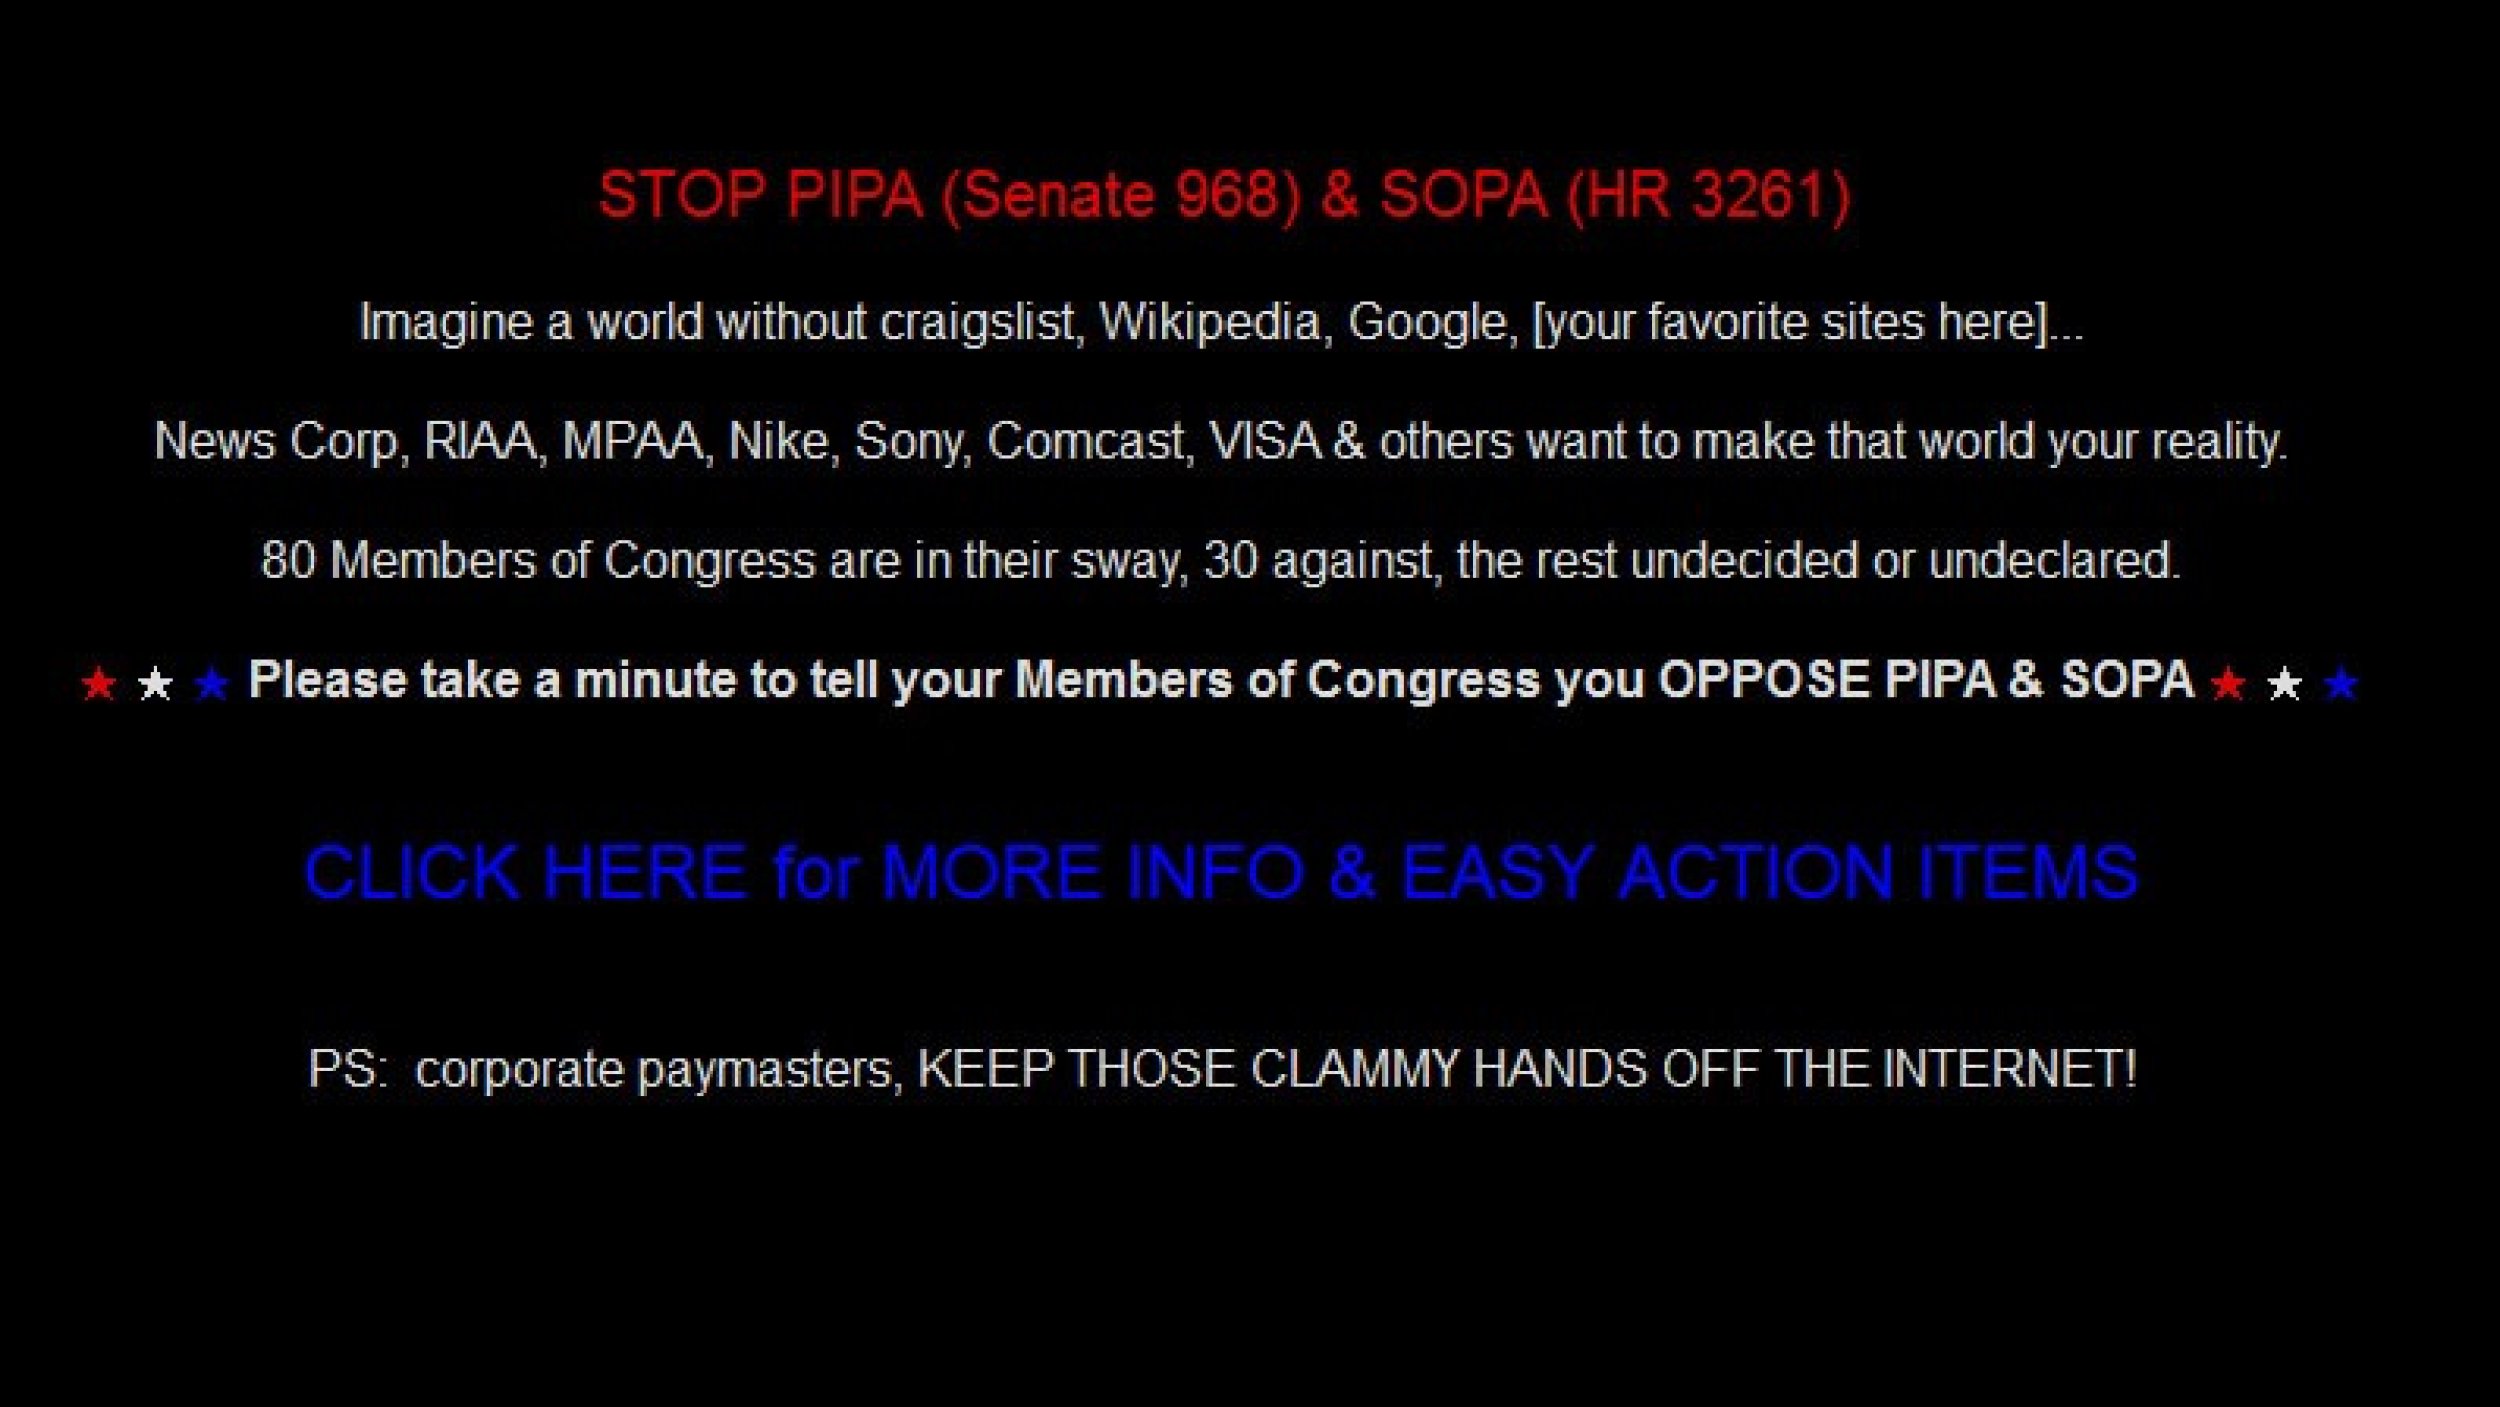 Craiglists Blackout in protest against SOPA